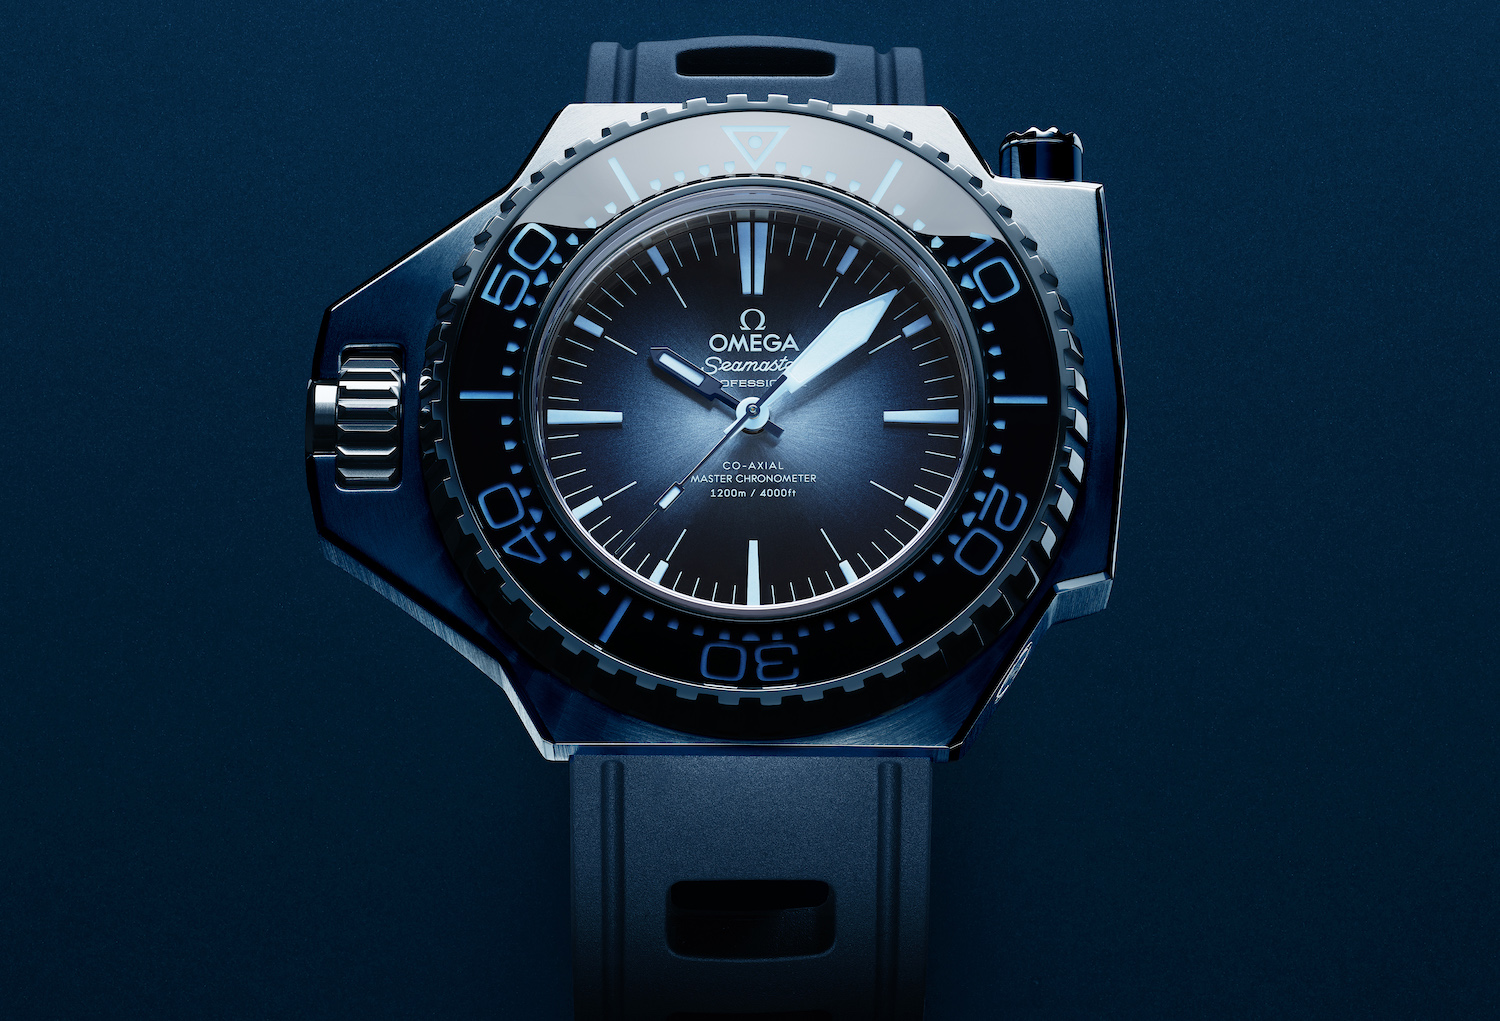 Blue-colored watch on blue background